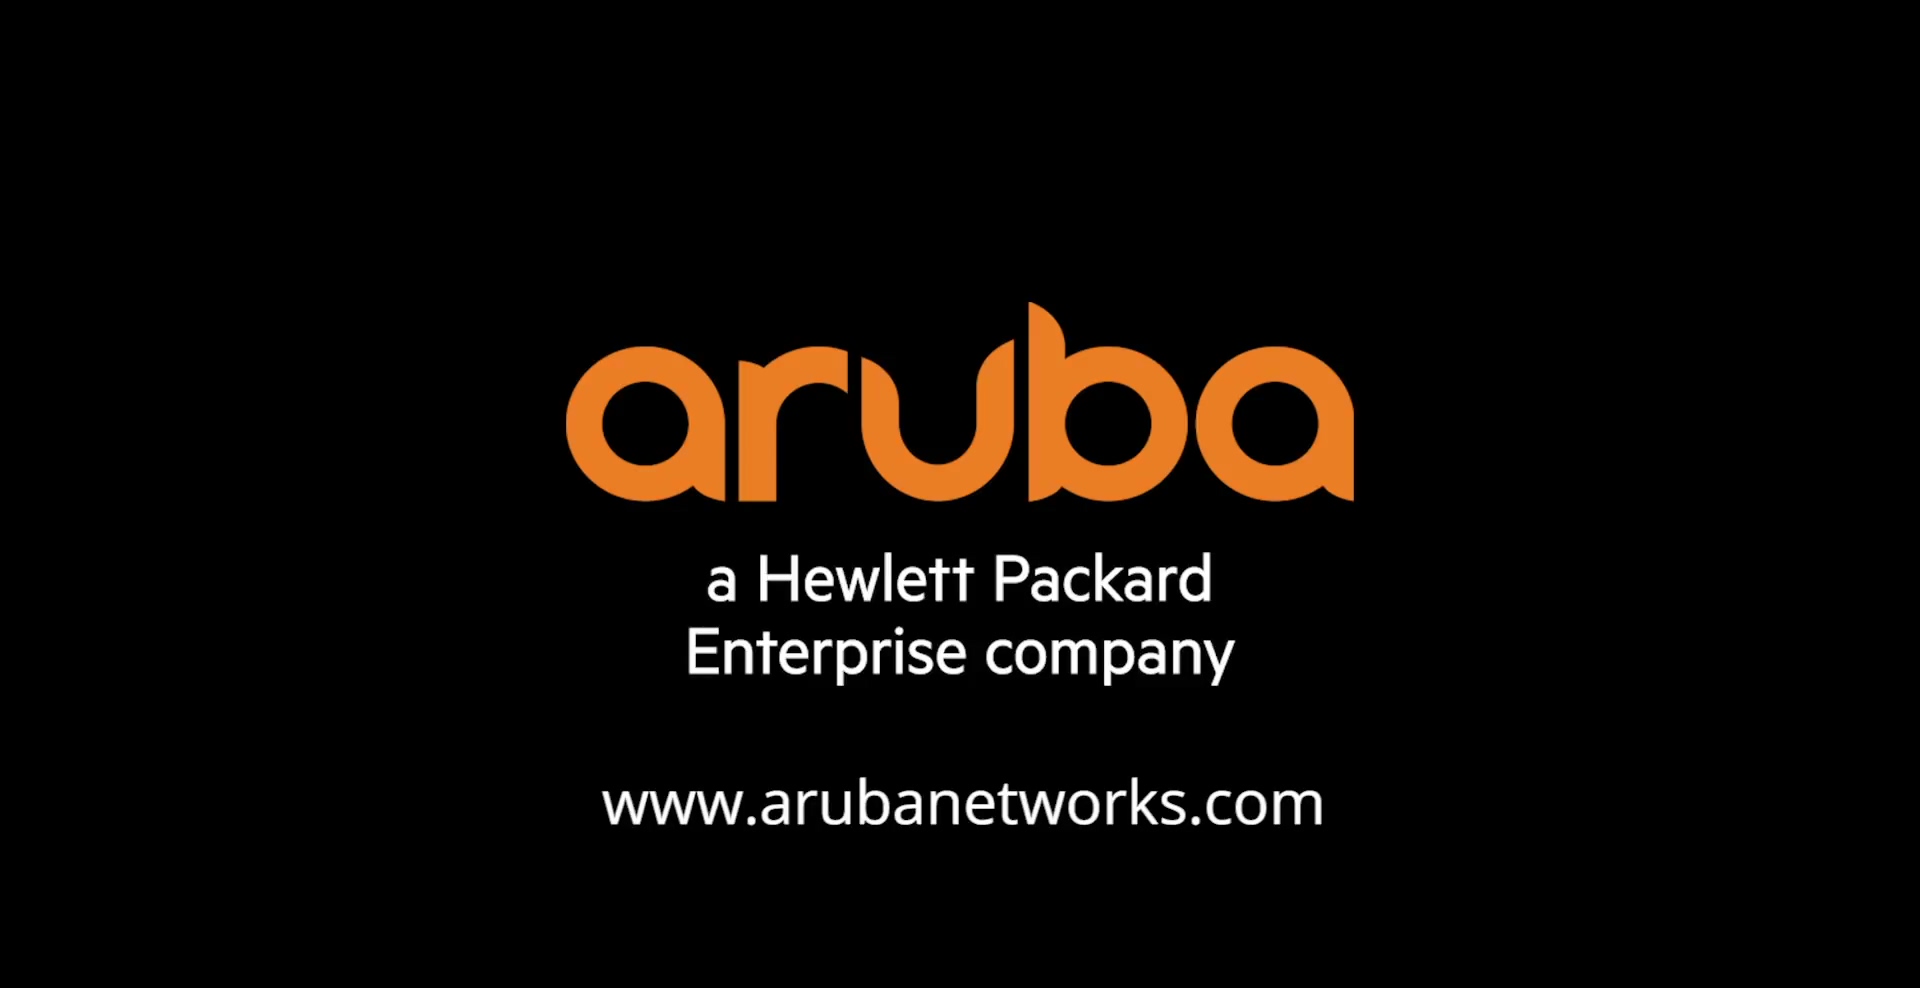 y2mate.com - Let Aruba help you innovate at the speed of mobile and IoT_x2fu8o-0X1Y_1080p